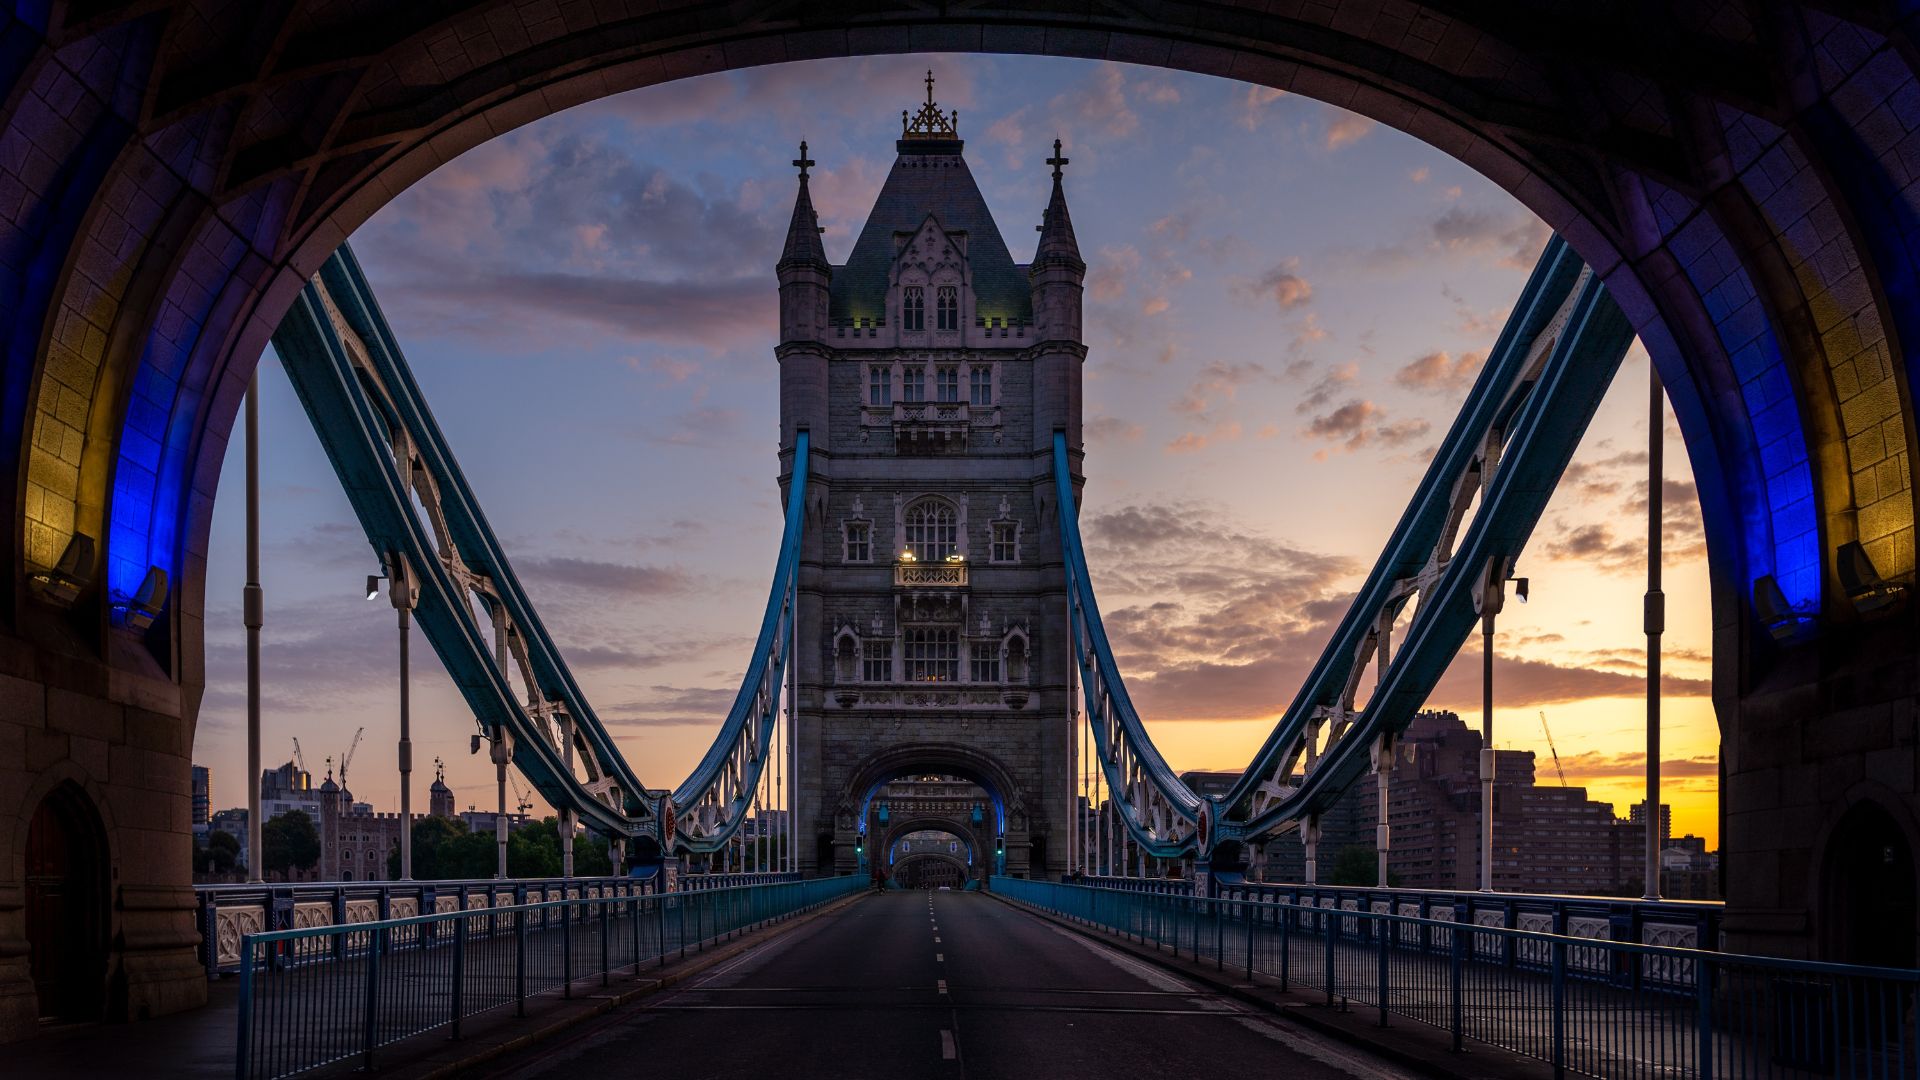 Centred photograph of Tower Bridge in London